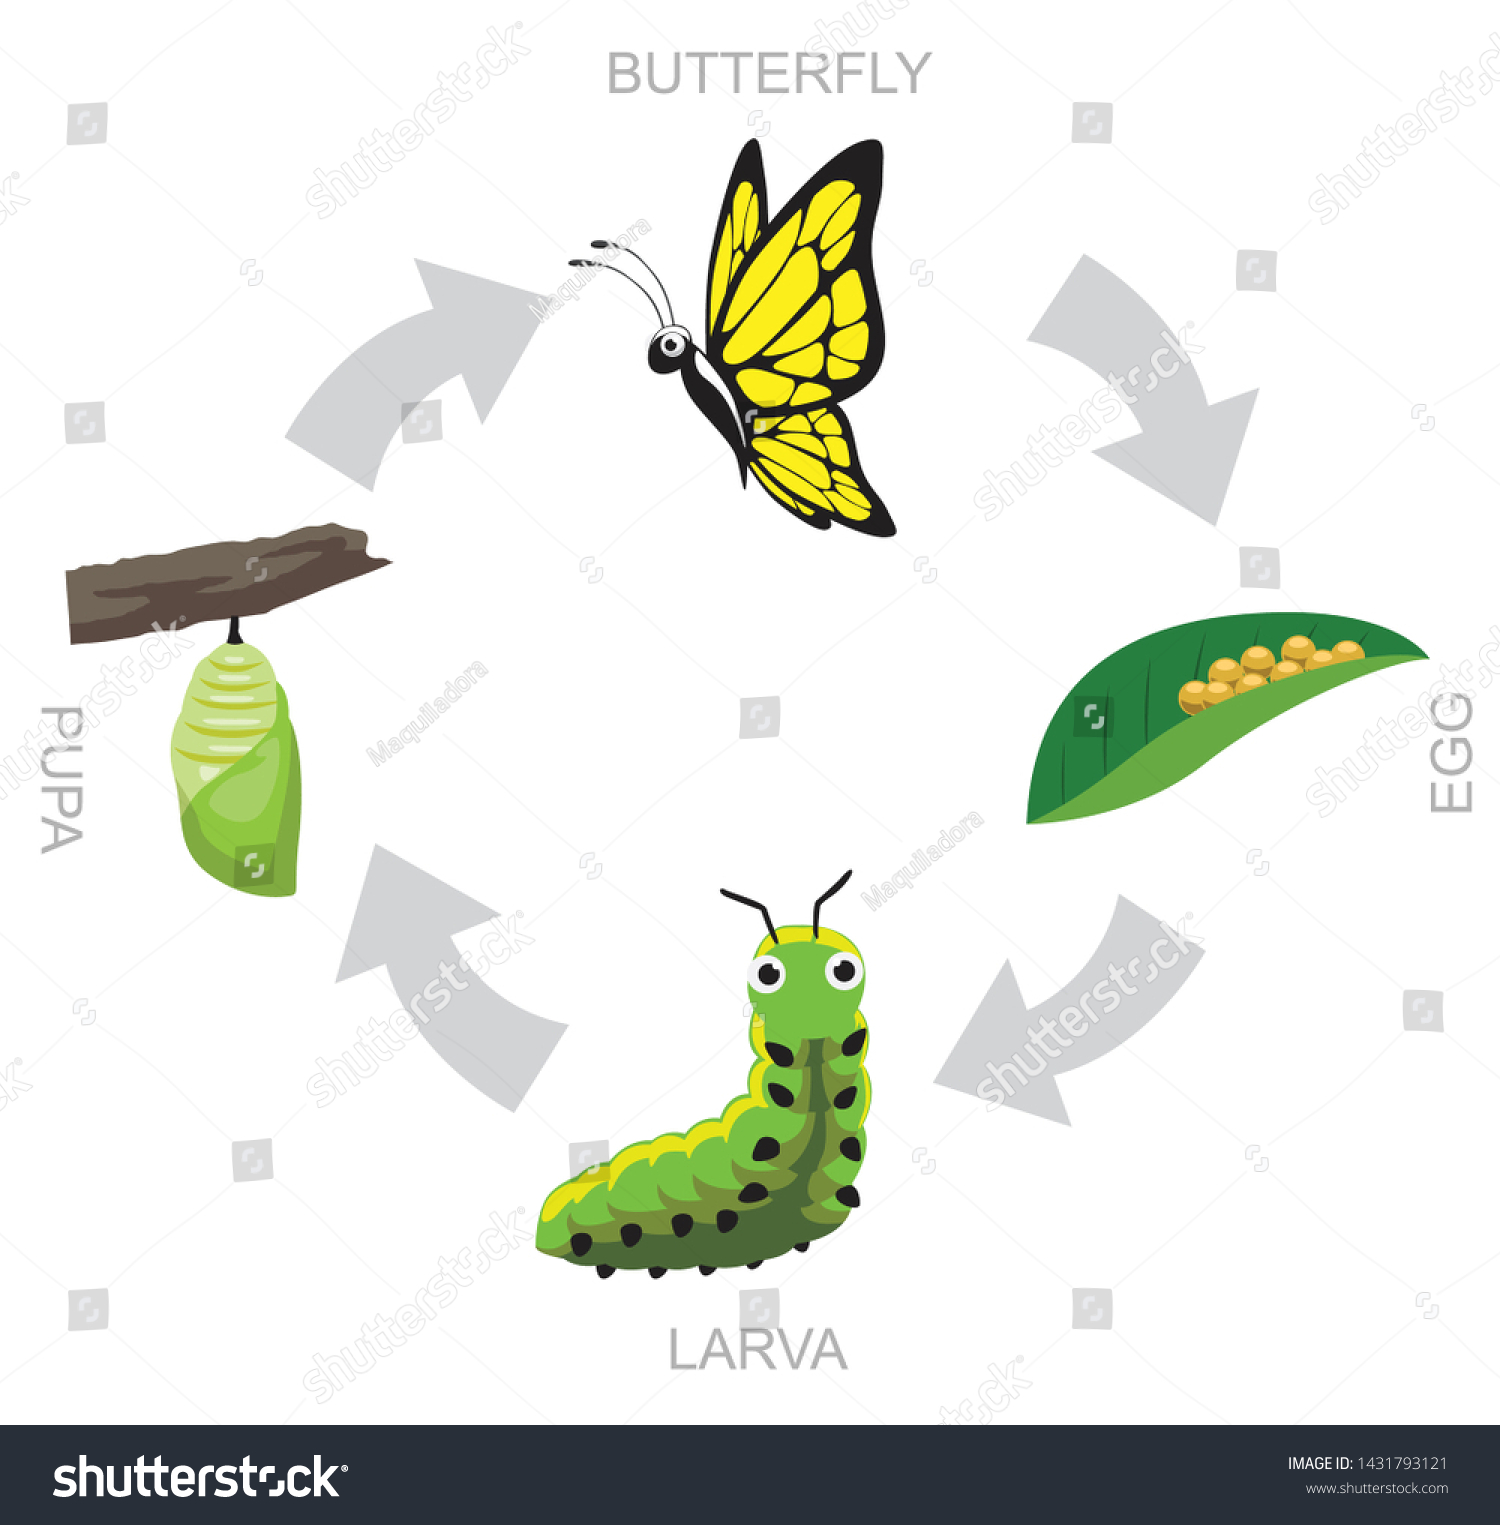 Butterfly Pupa Larva Life Cycle Vector - Royalty Free Stock Vector ...